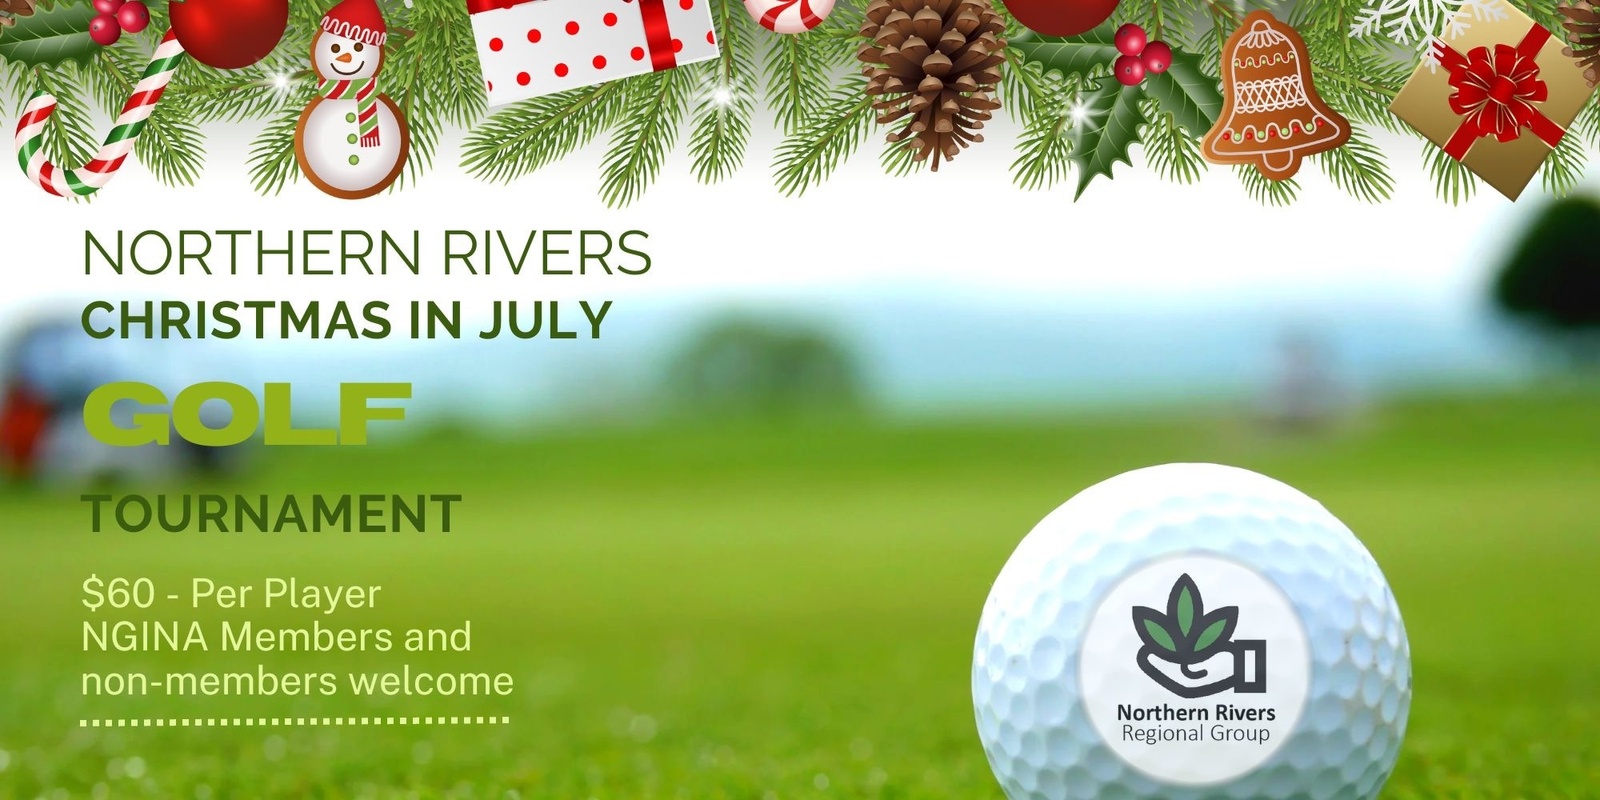 Banner image for NORTHERN RIVERS CHRISTMAS IN JULY GOLF TOURNAMENT